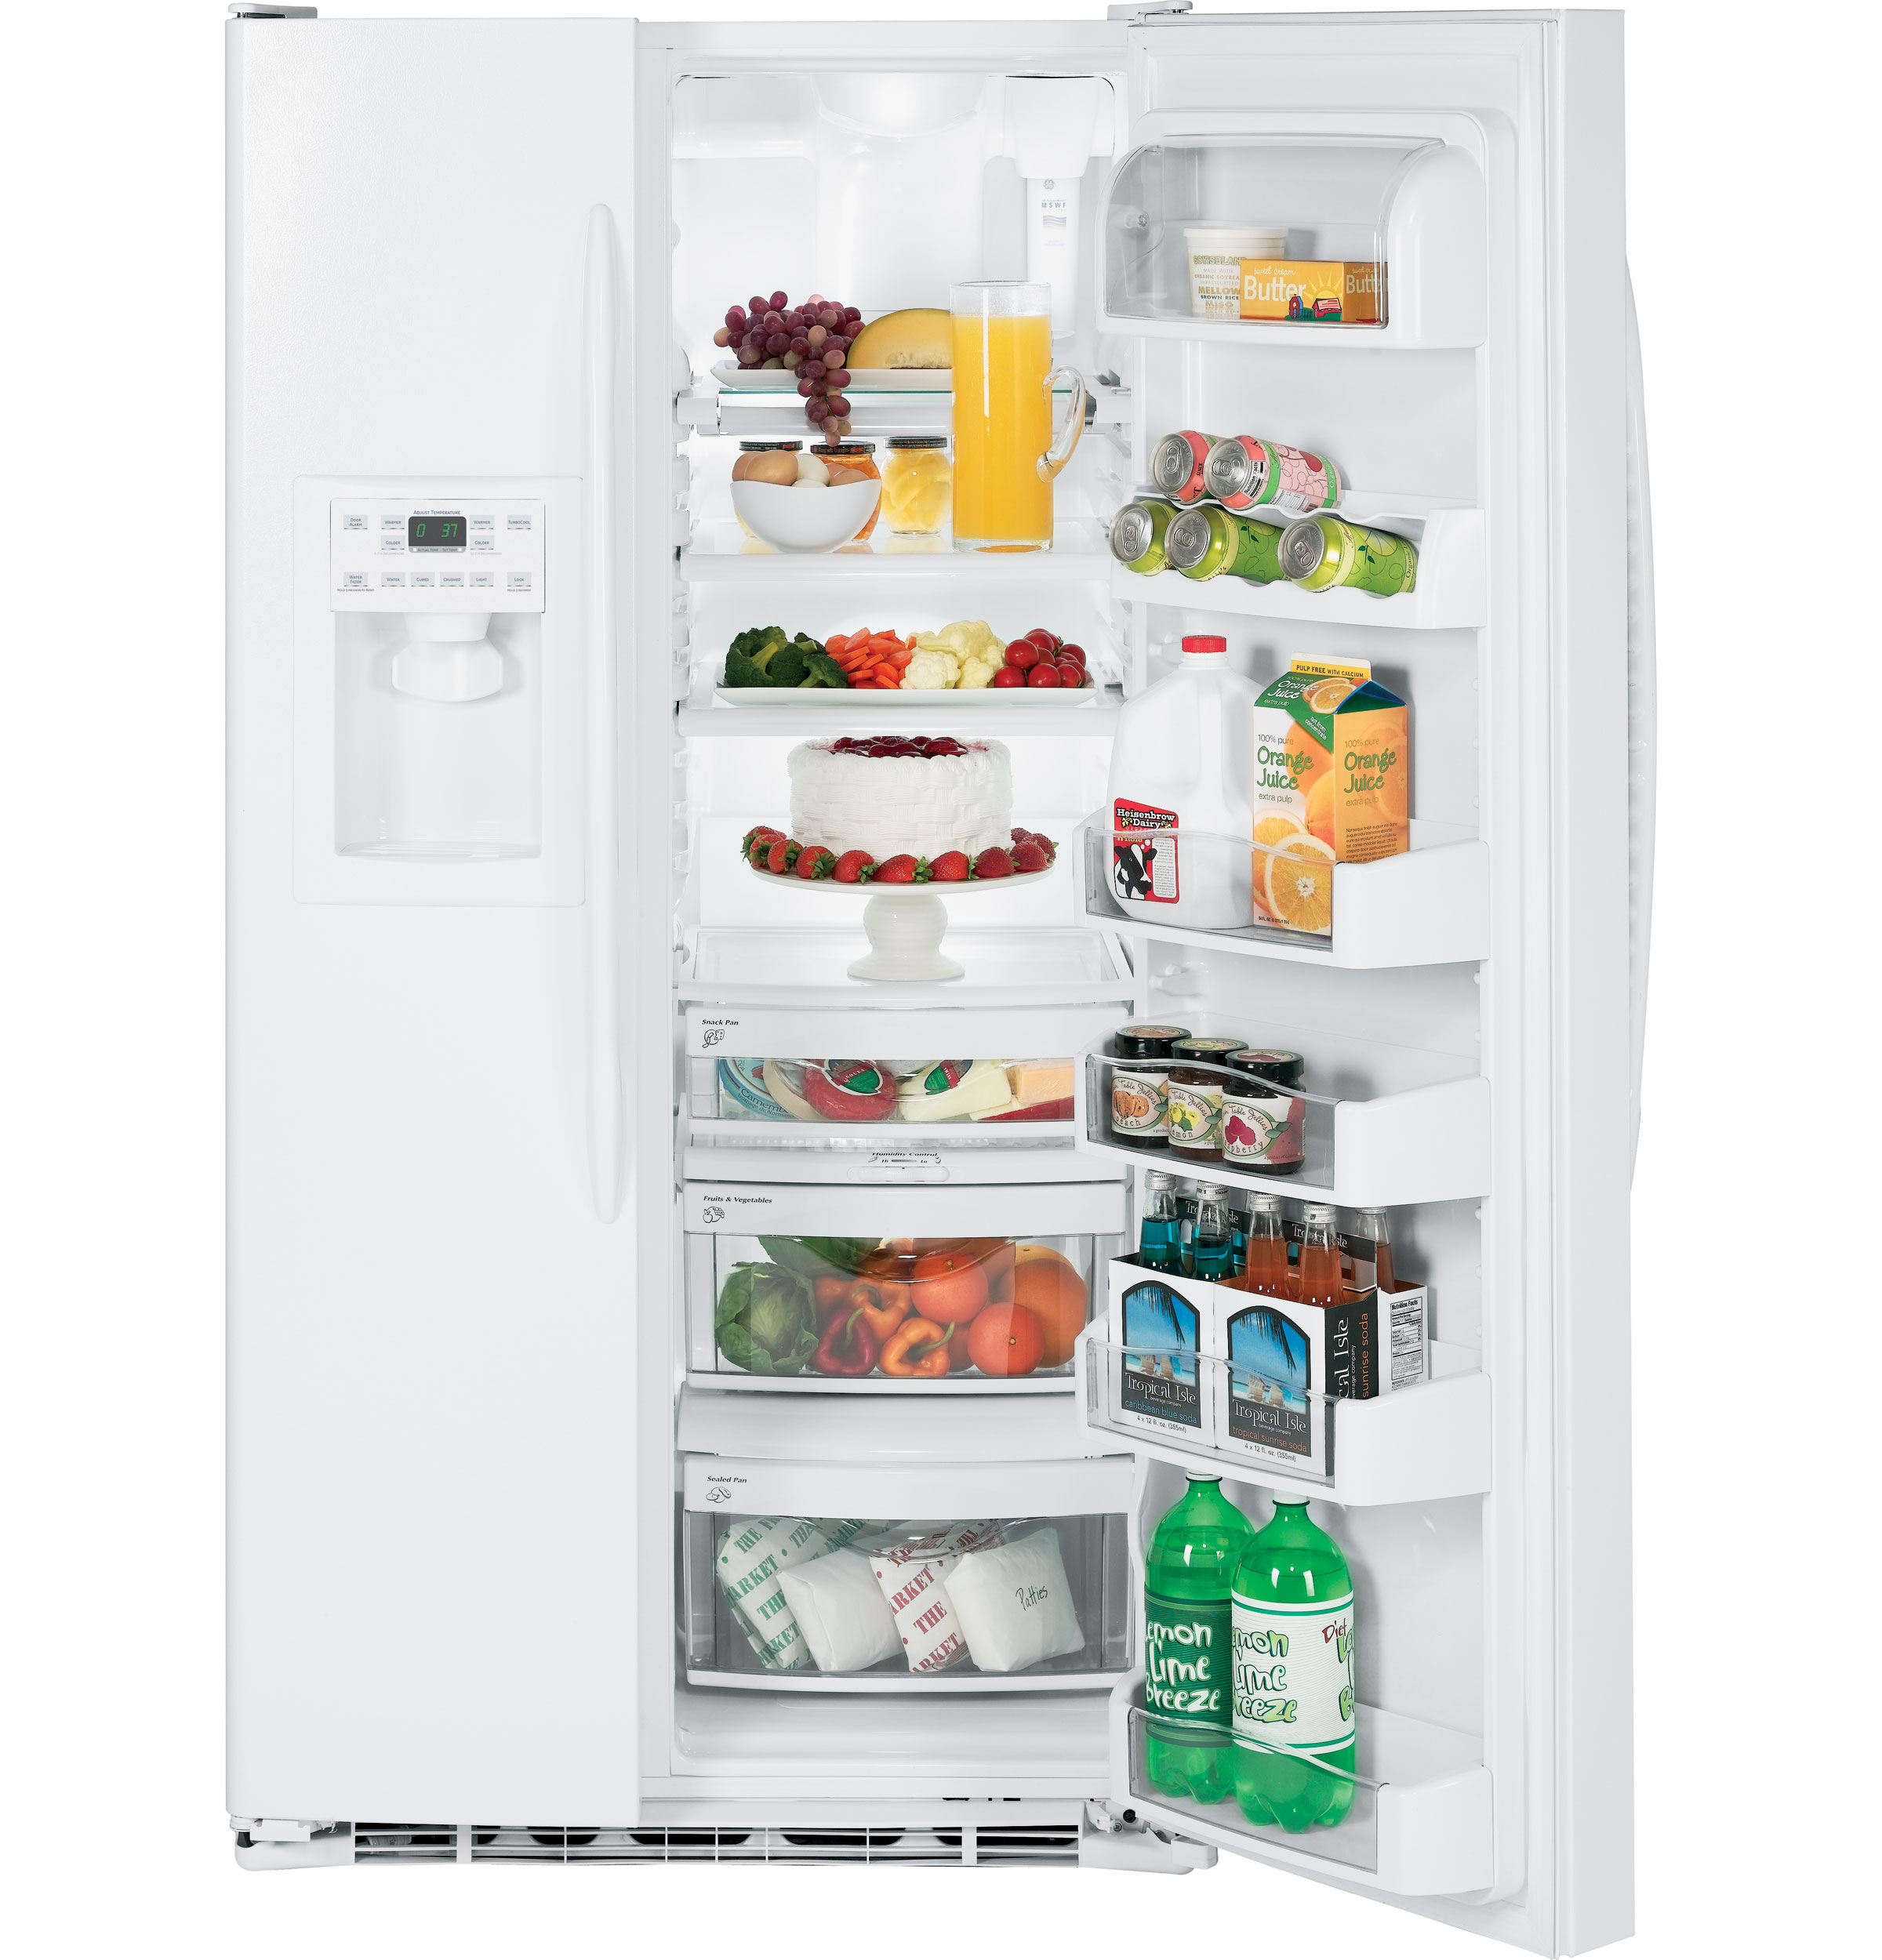 GE Profile™ 25.6 Cu. Ft. Side-by-Side Refrigerator with Dispenser